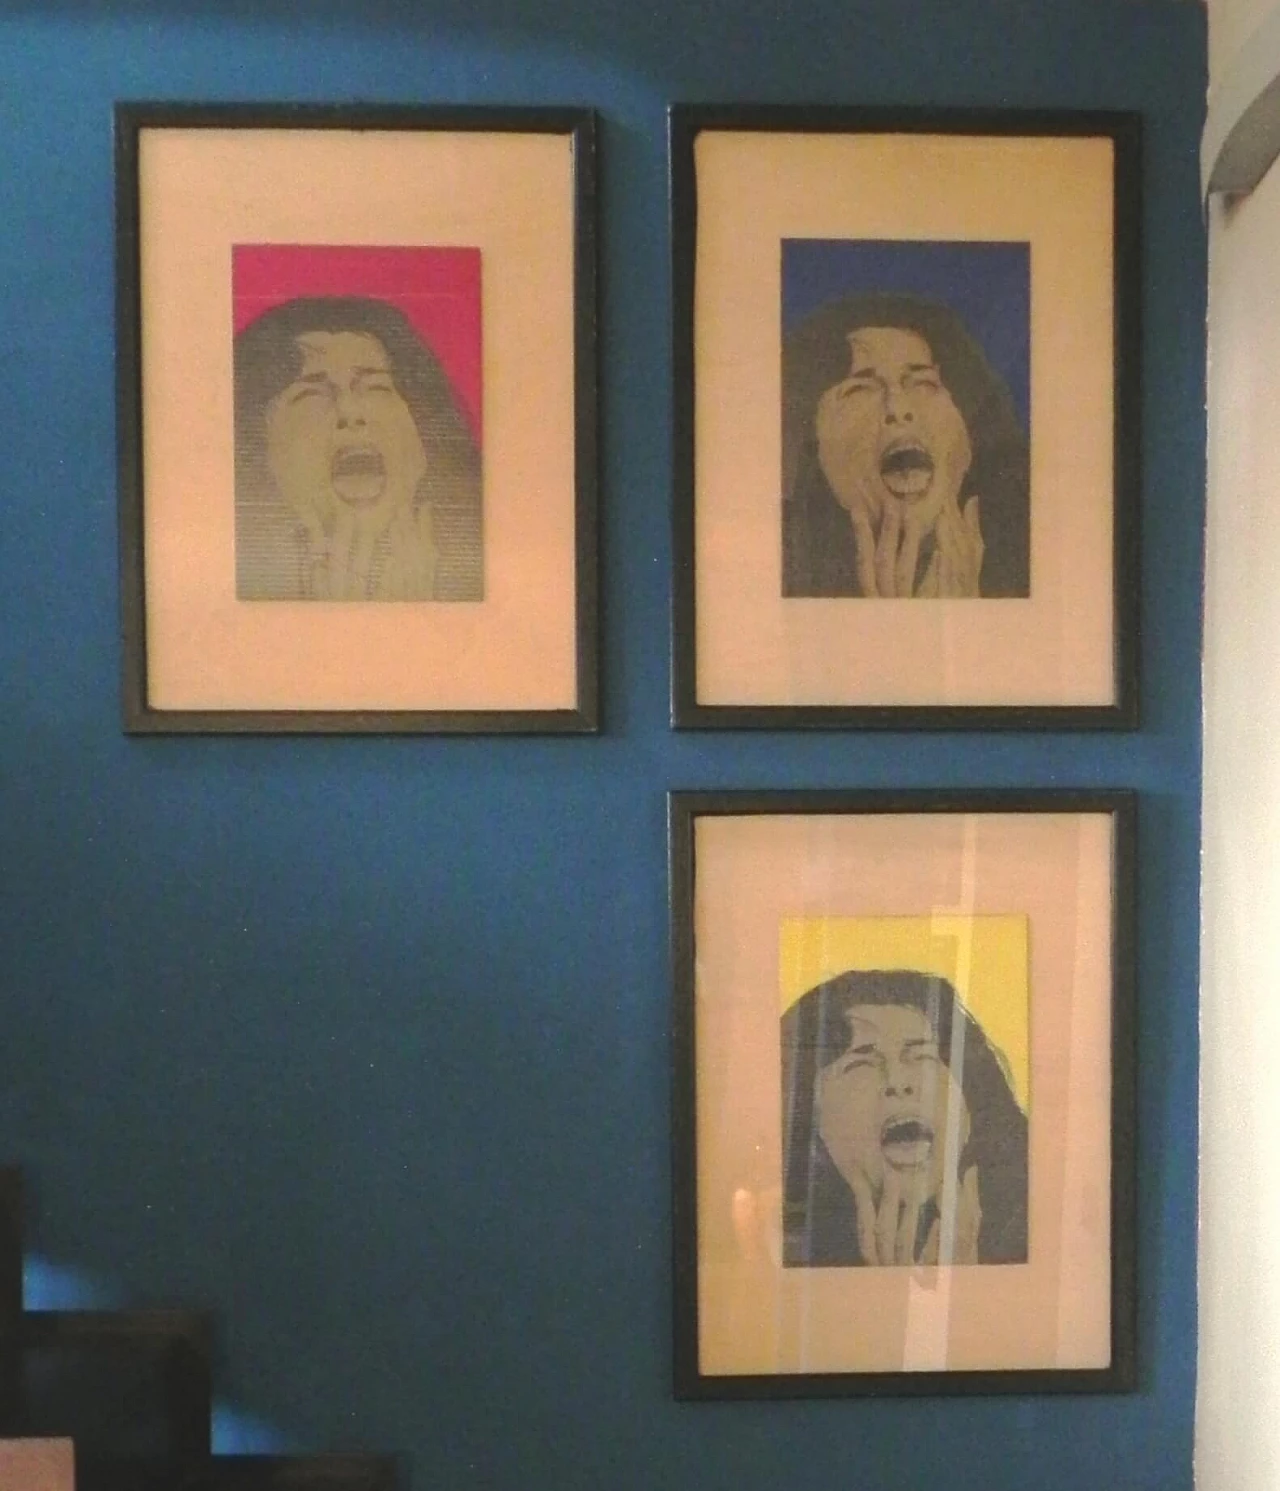 3 Paintings of Anna Magnani by David Parenti, 1980s 1